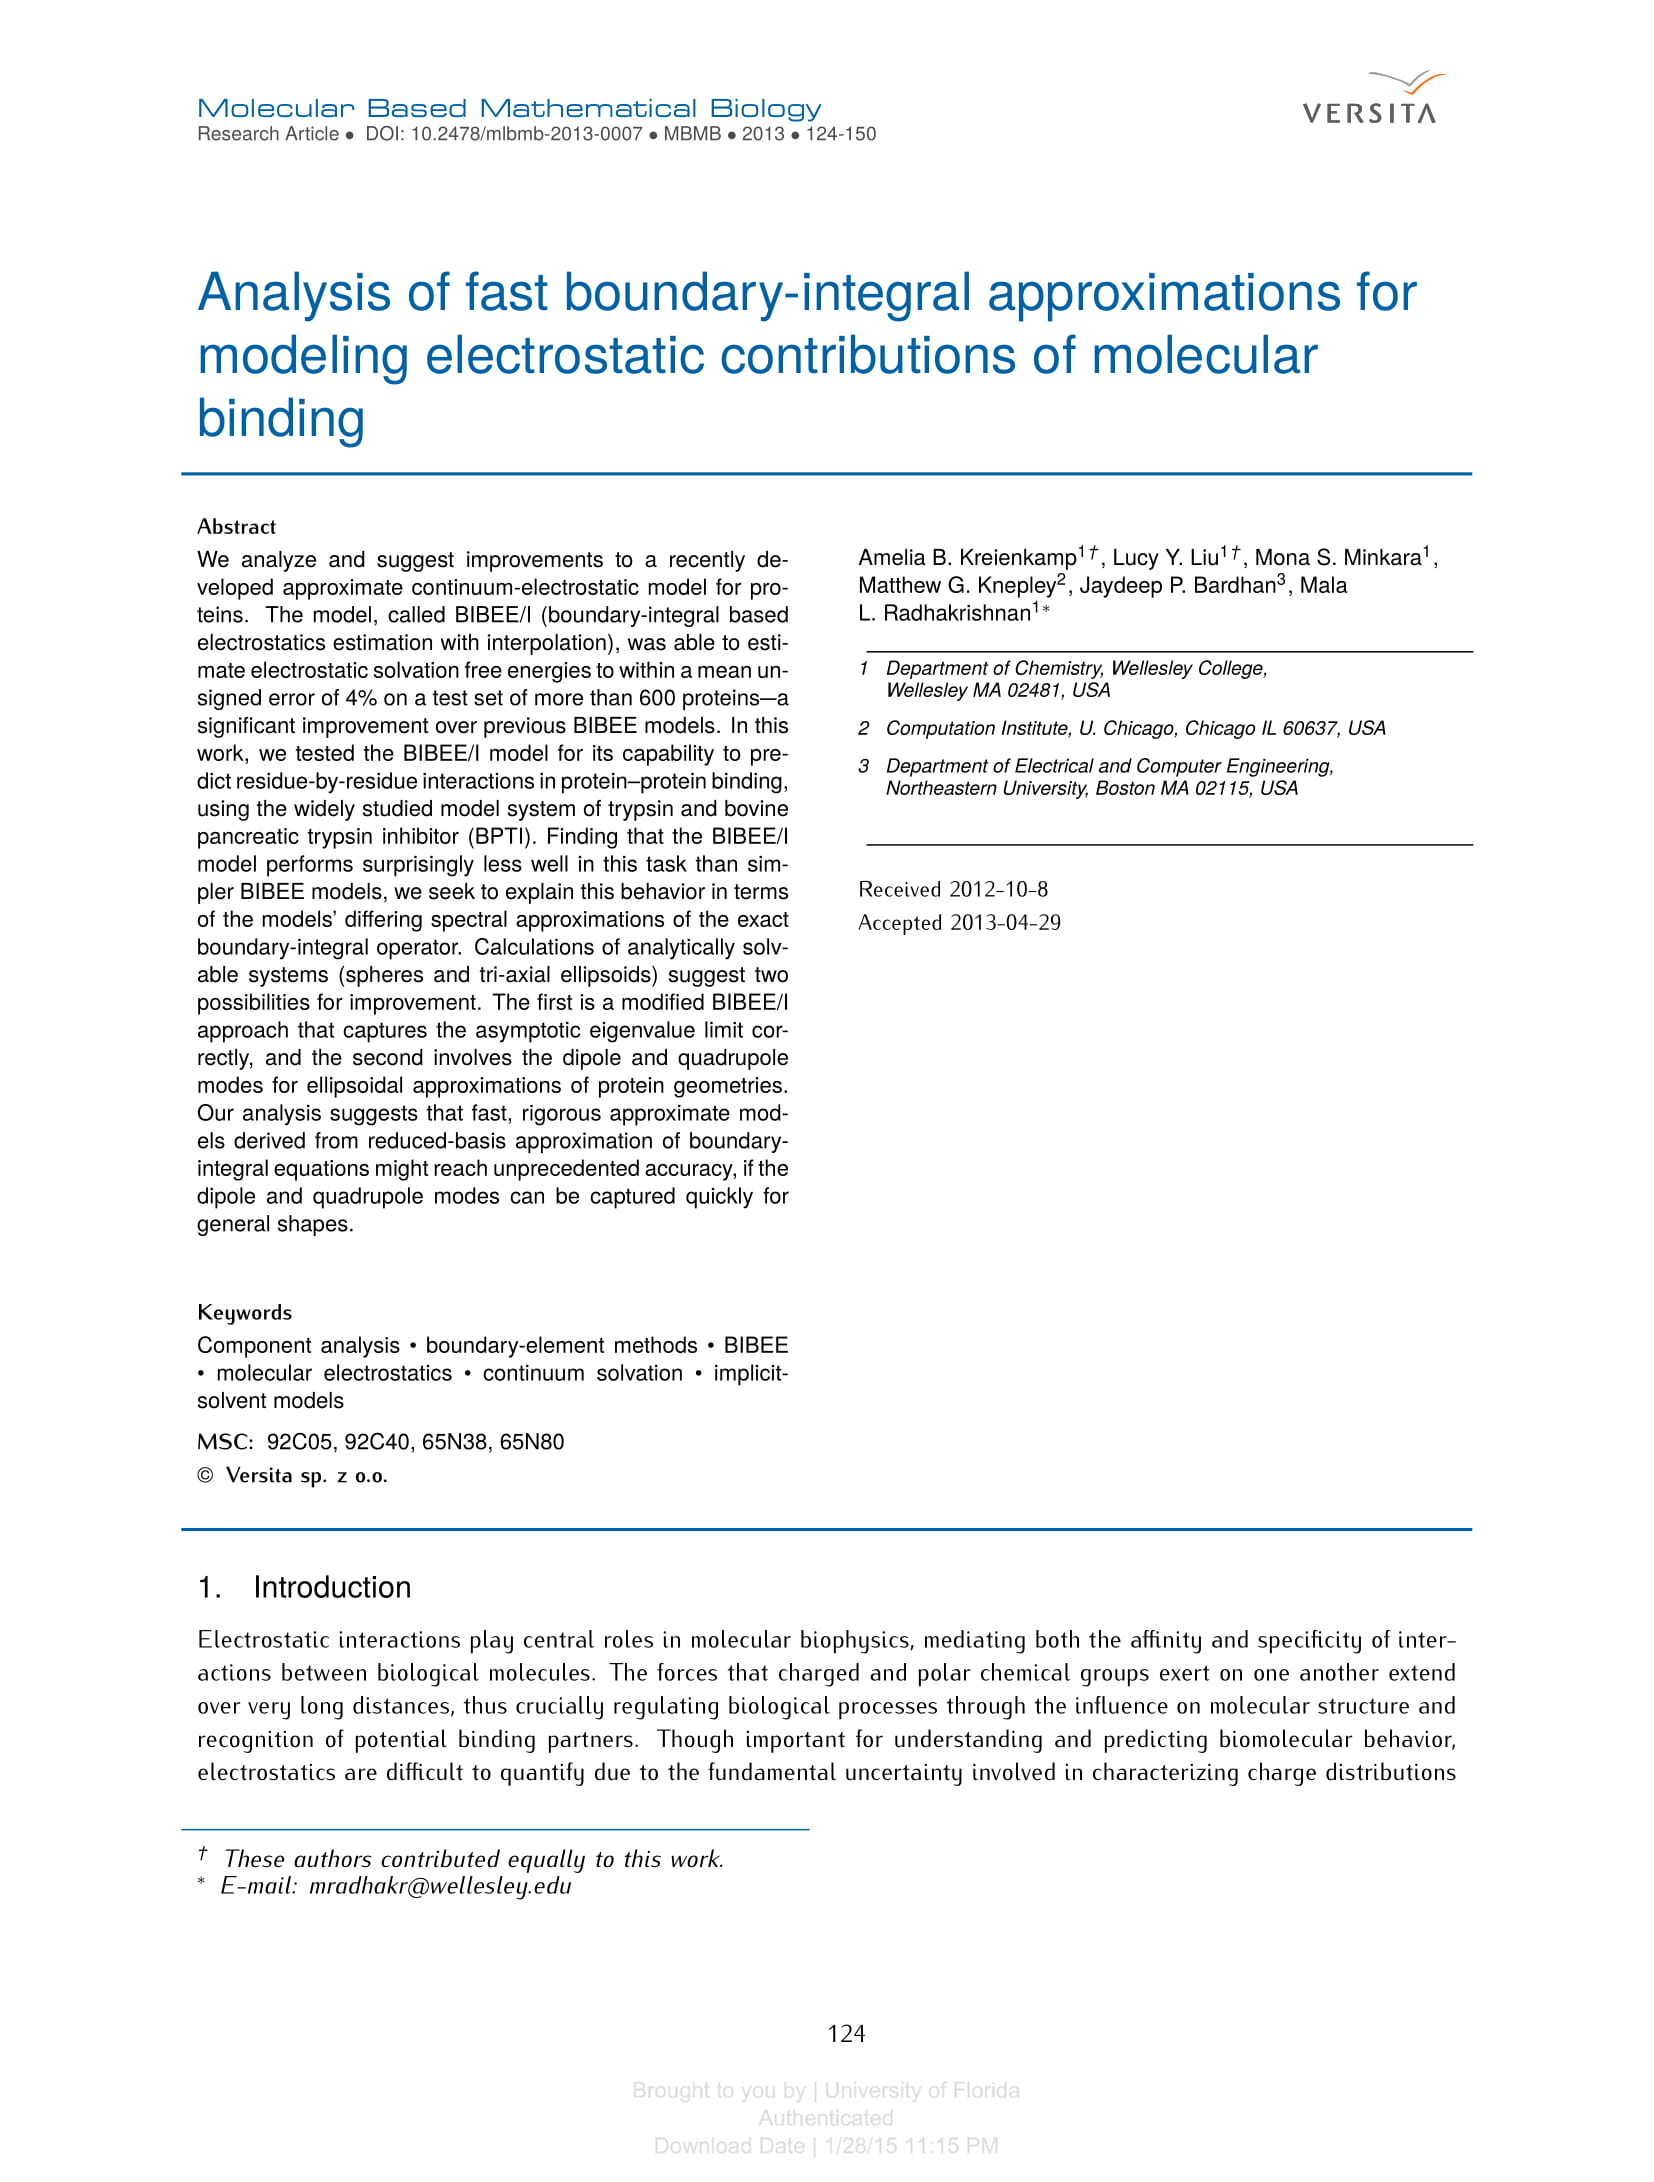 Analysis of Fast Boundary-Integral Approximations for Modeling Electrostatic Contributions of Molecular Binding